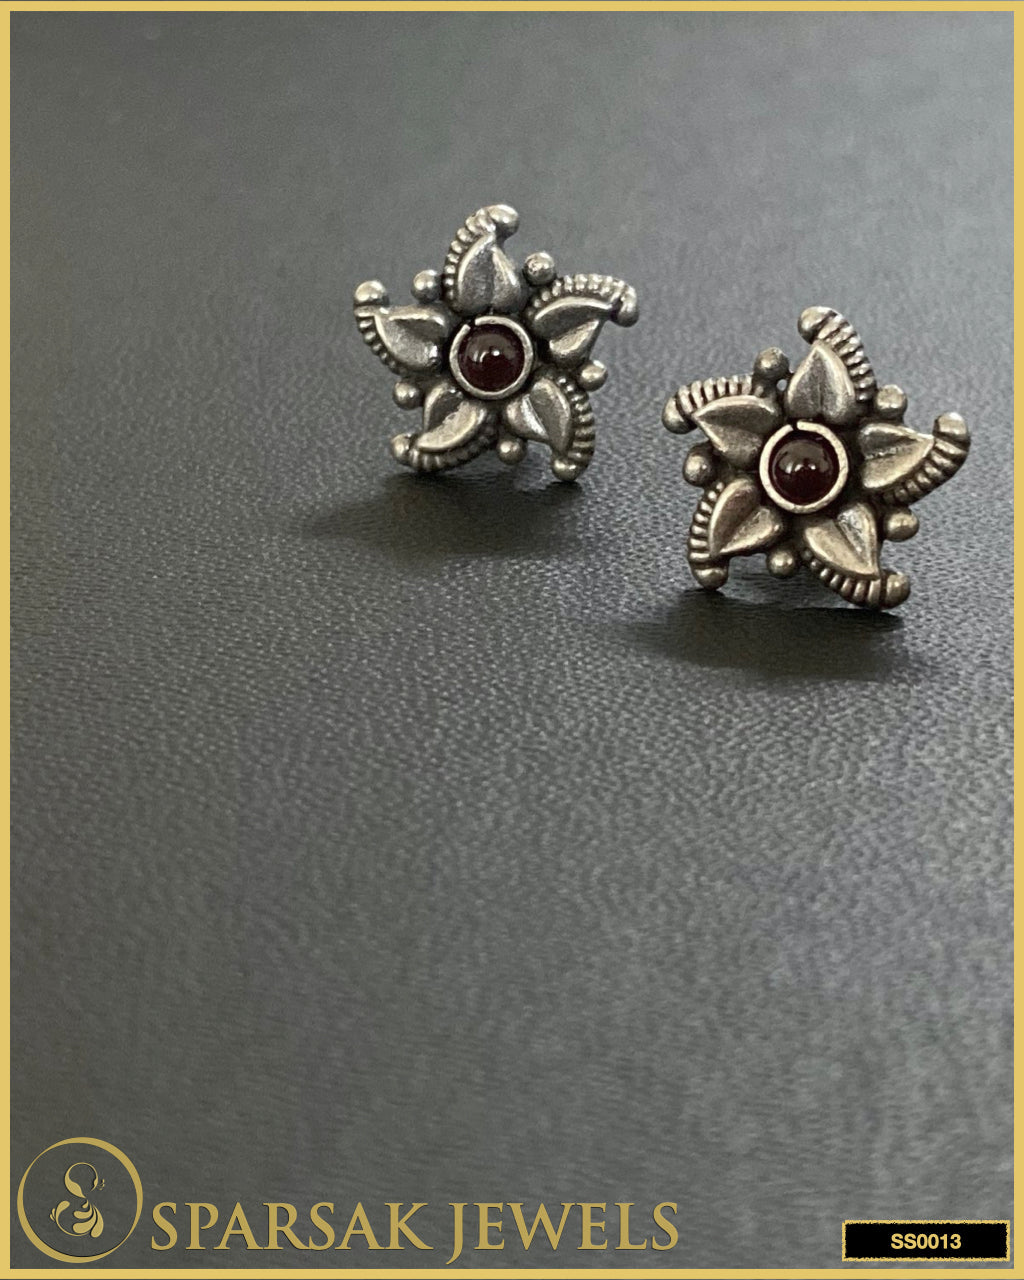 Exquisite silver temple earrings studs on black background.